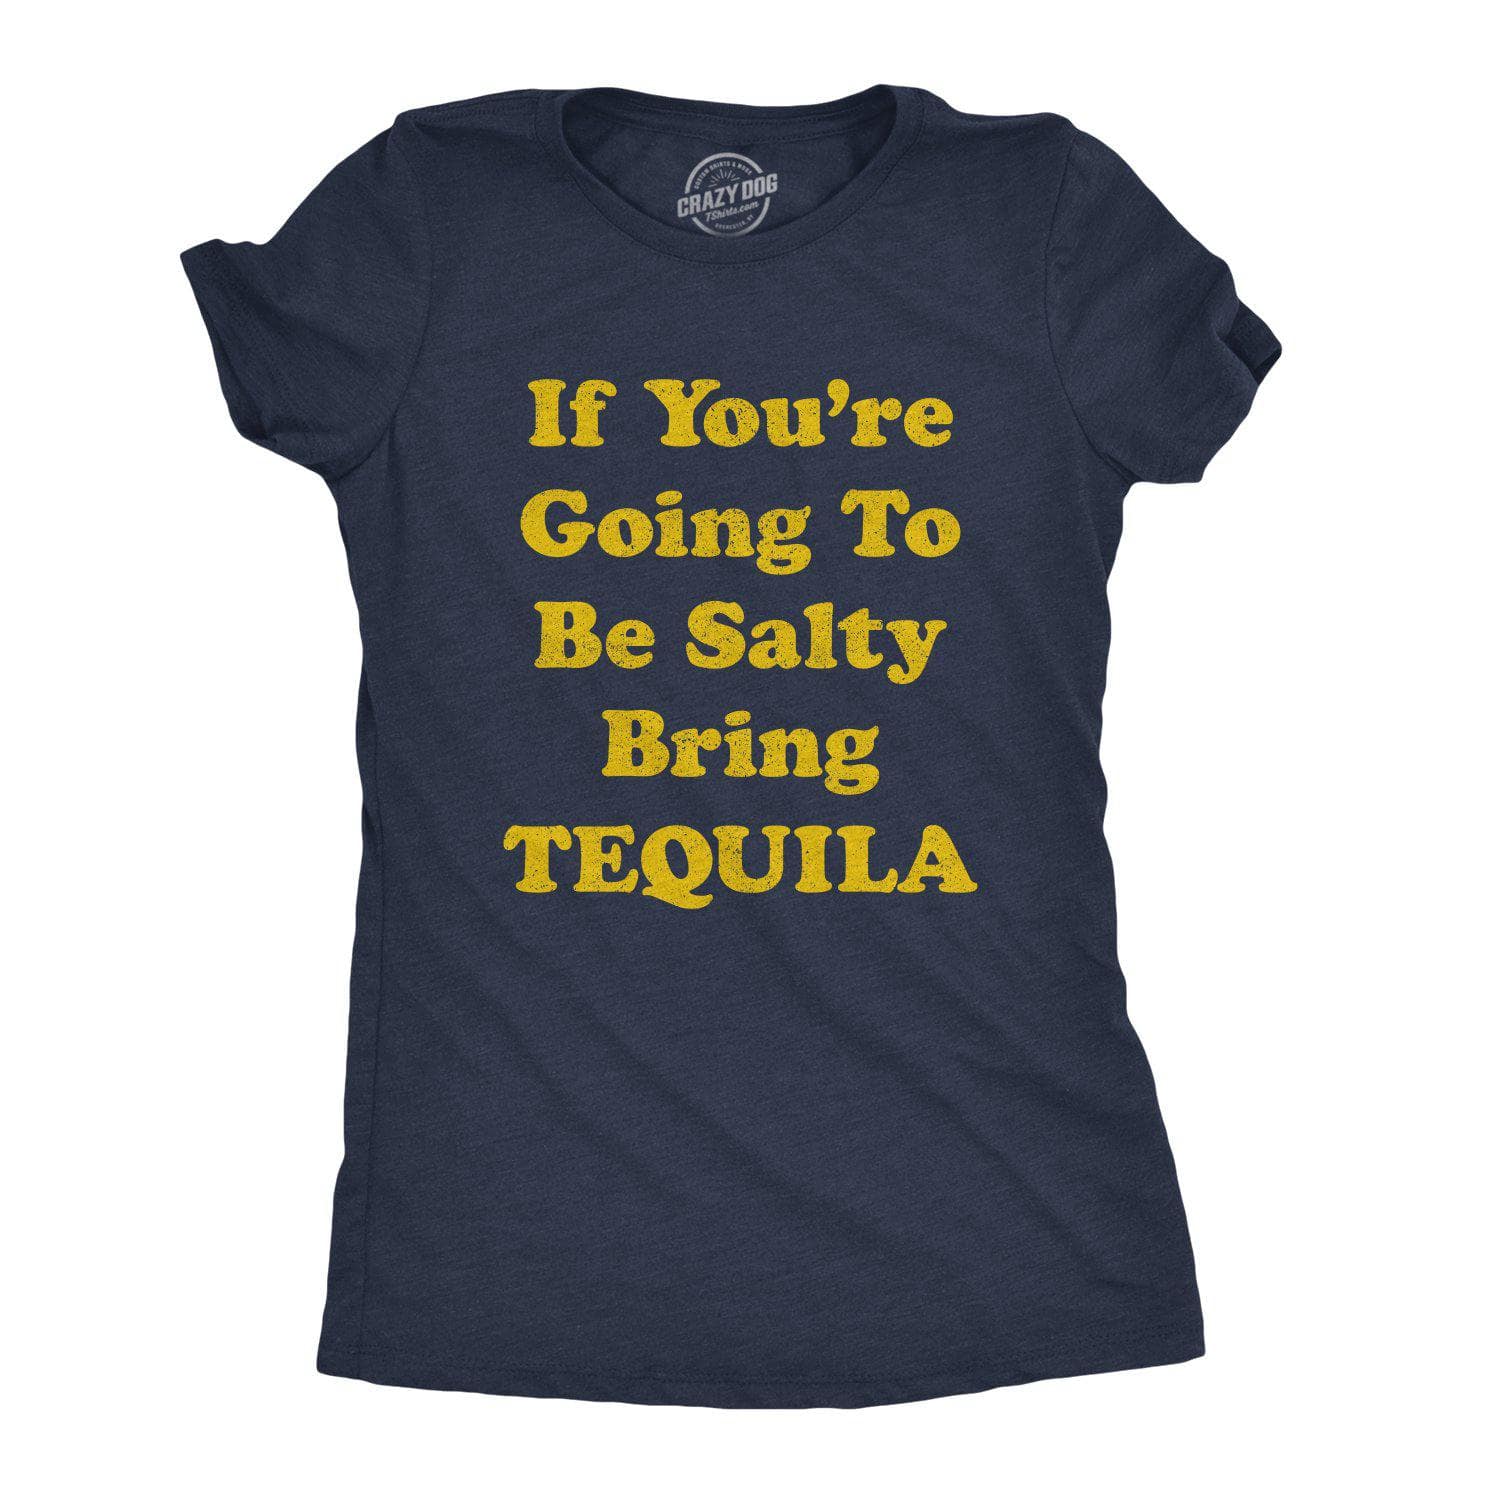 If You're Going To Be Salty Bring Tequila Women's Tshirt  -  Crazy Dog T-Shirts